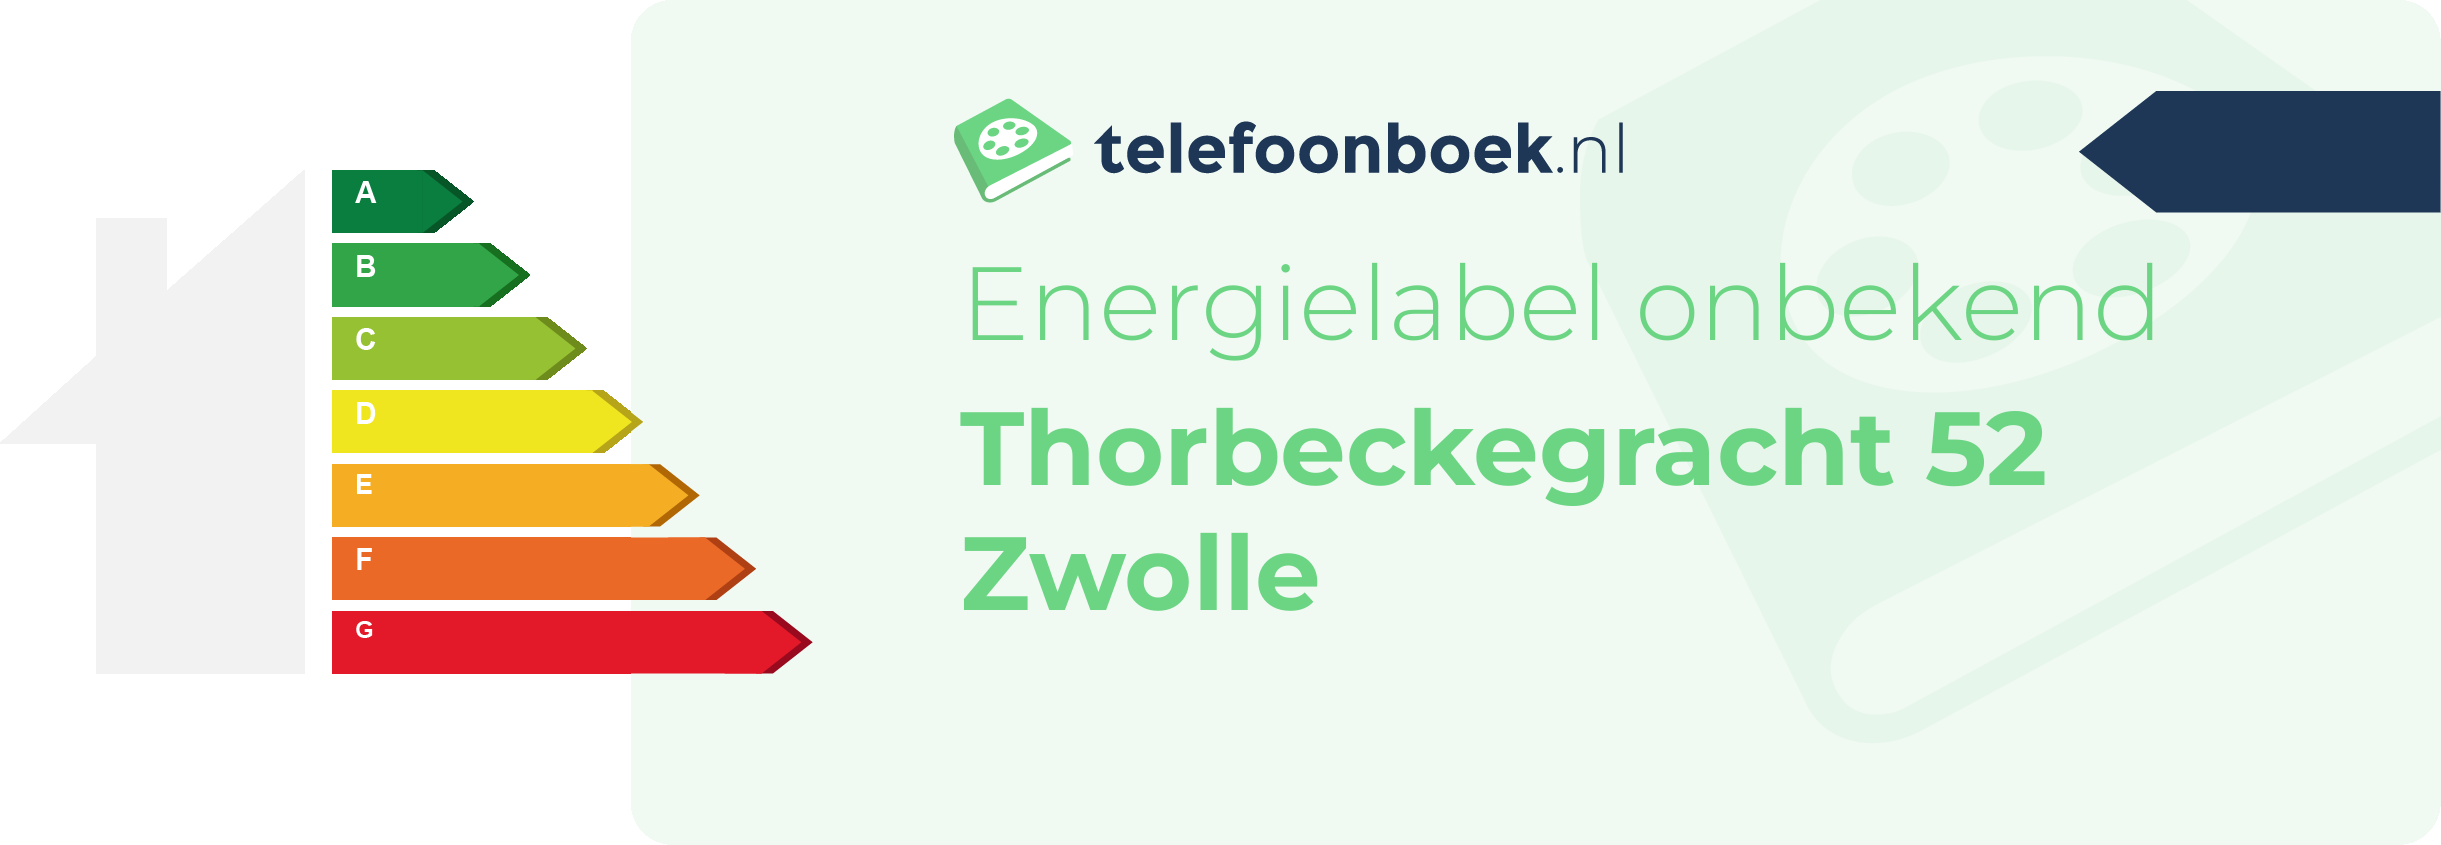 Energielabel Thorbeckegracht 52 Zwolle